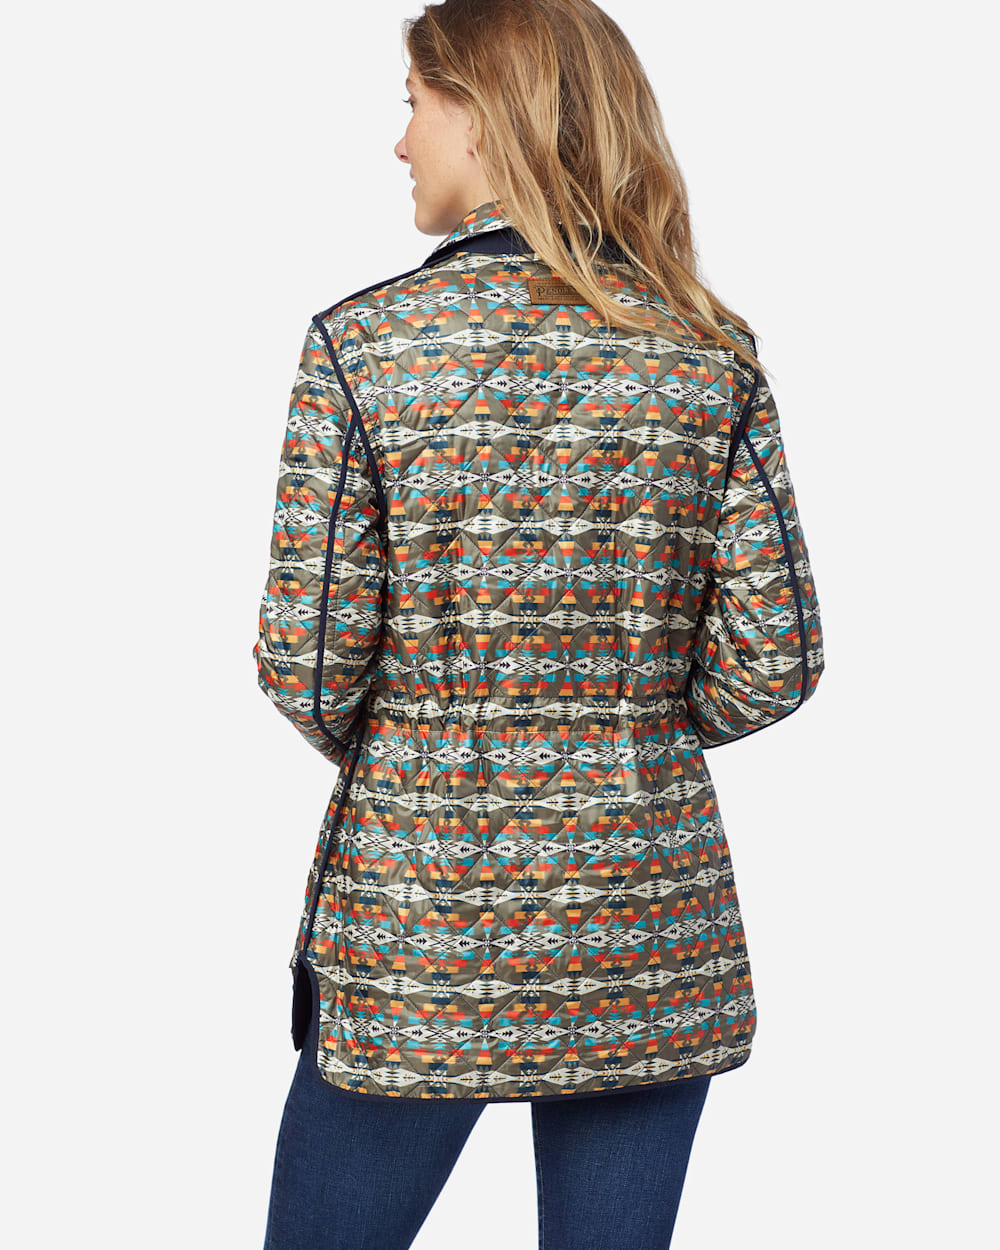 ALTERNATE VIEW OF WOMEN'S MEADOW REVERSIBLE QUILTED JACKET IN TUCSON/NAVY image number 4